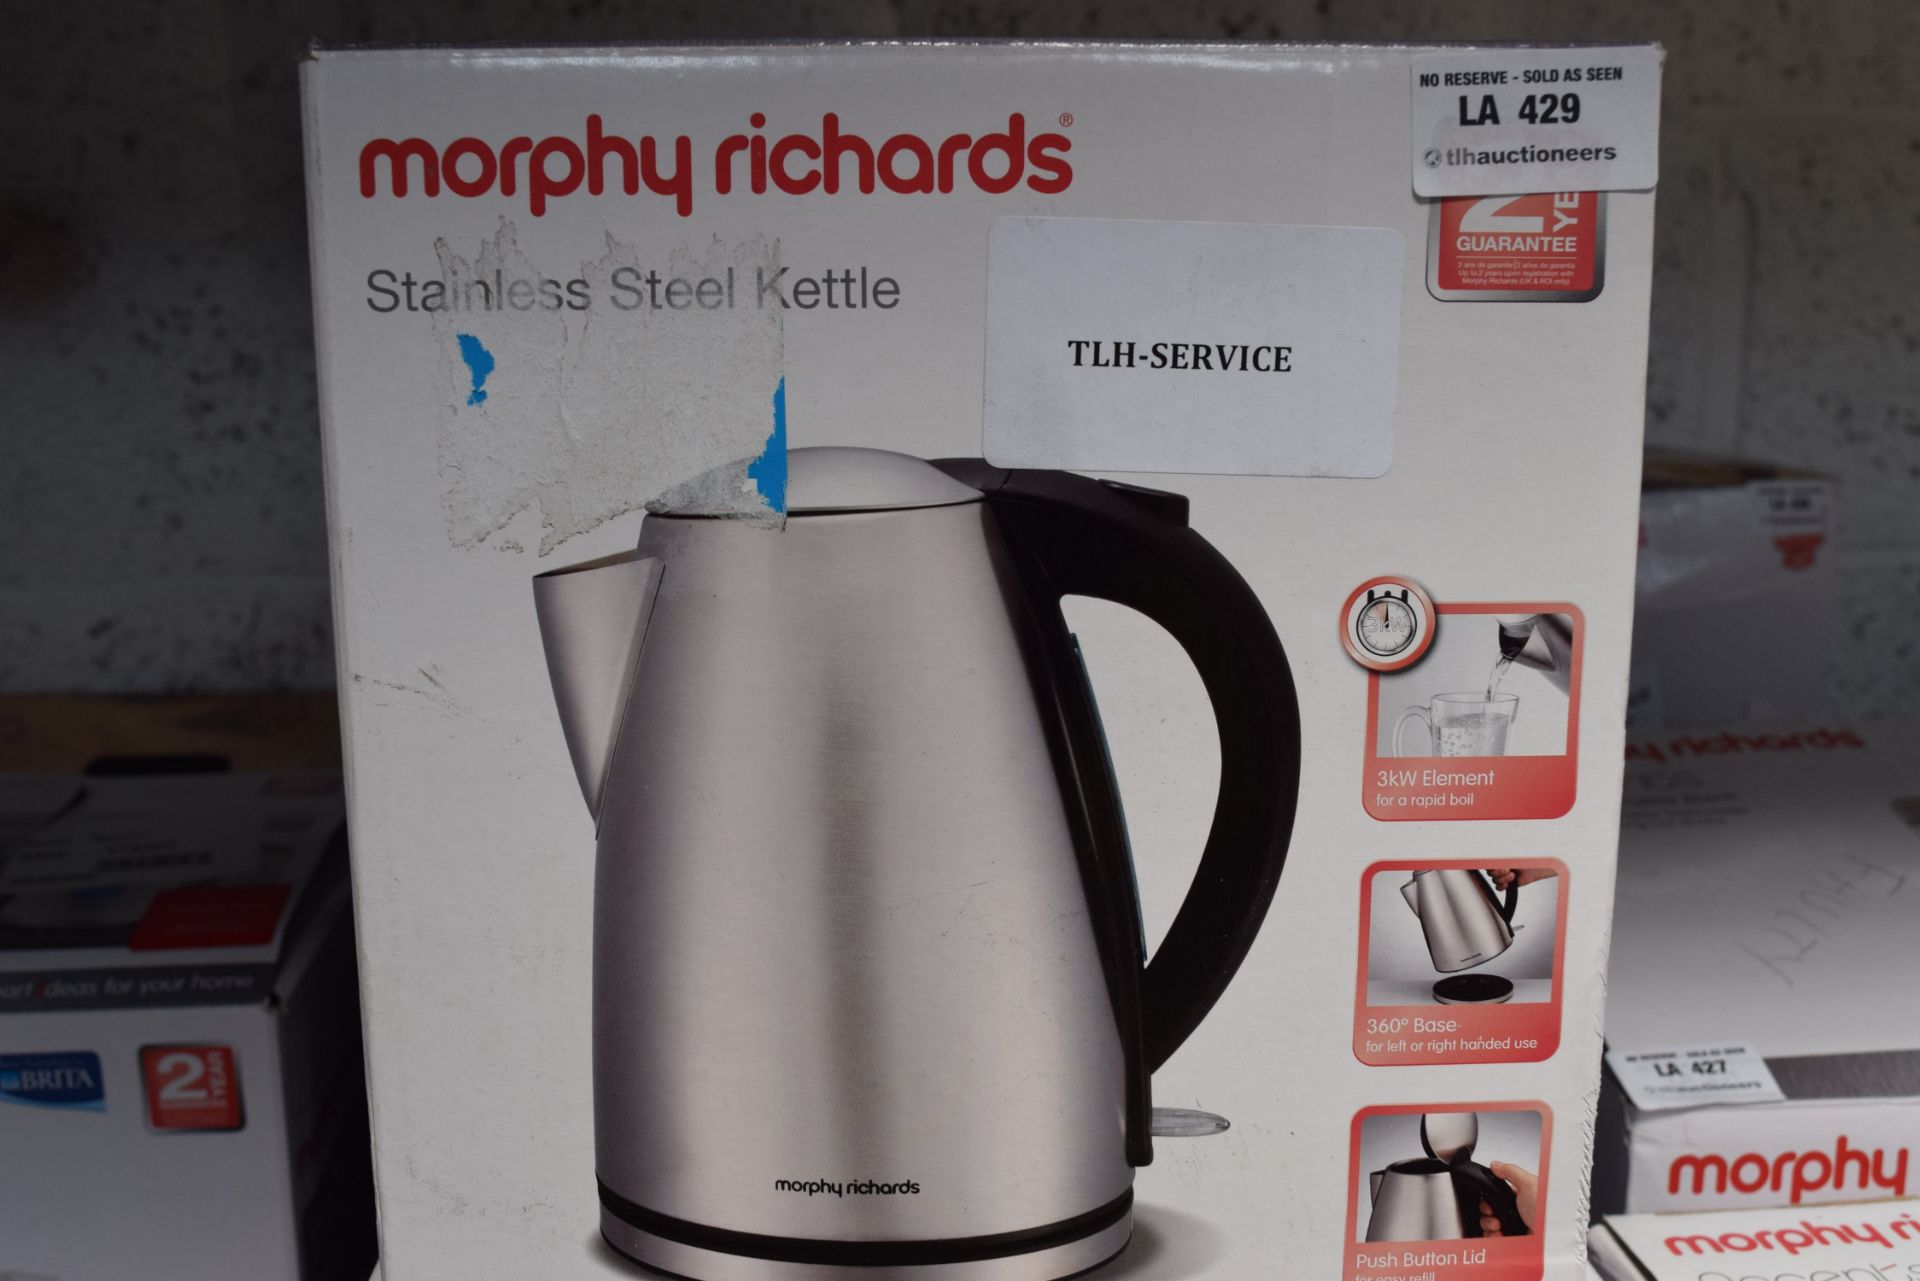 1 X BOXED MORPHY RICHARDS STAINLESS STEEL KETTLE RRP £25 11.05.2017